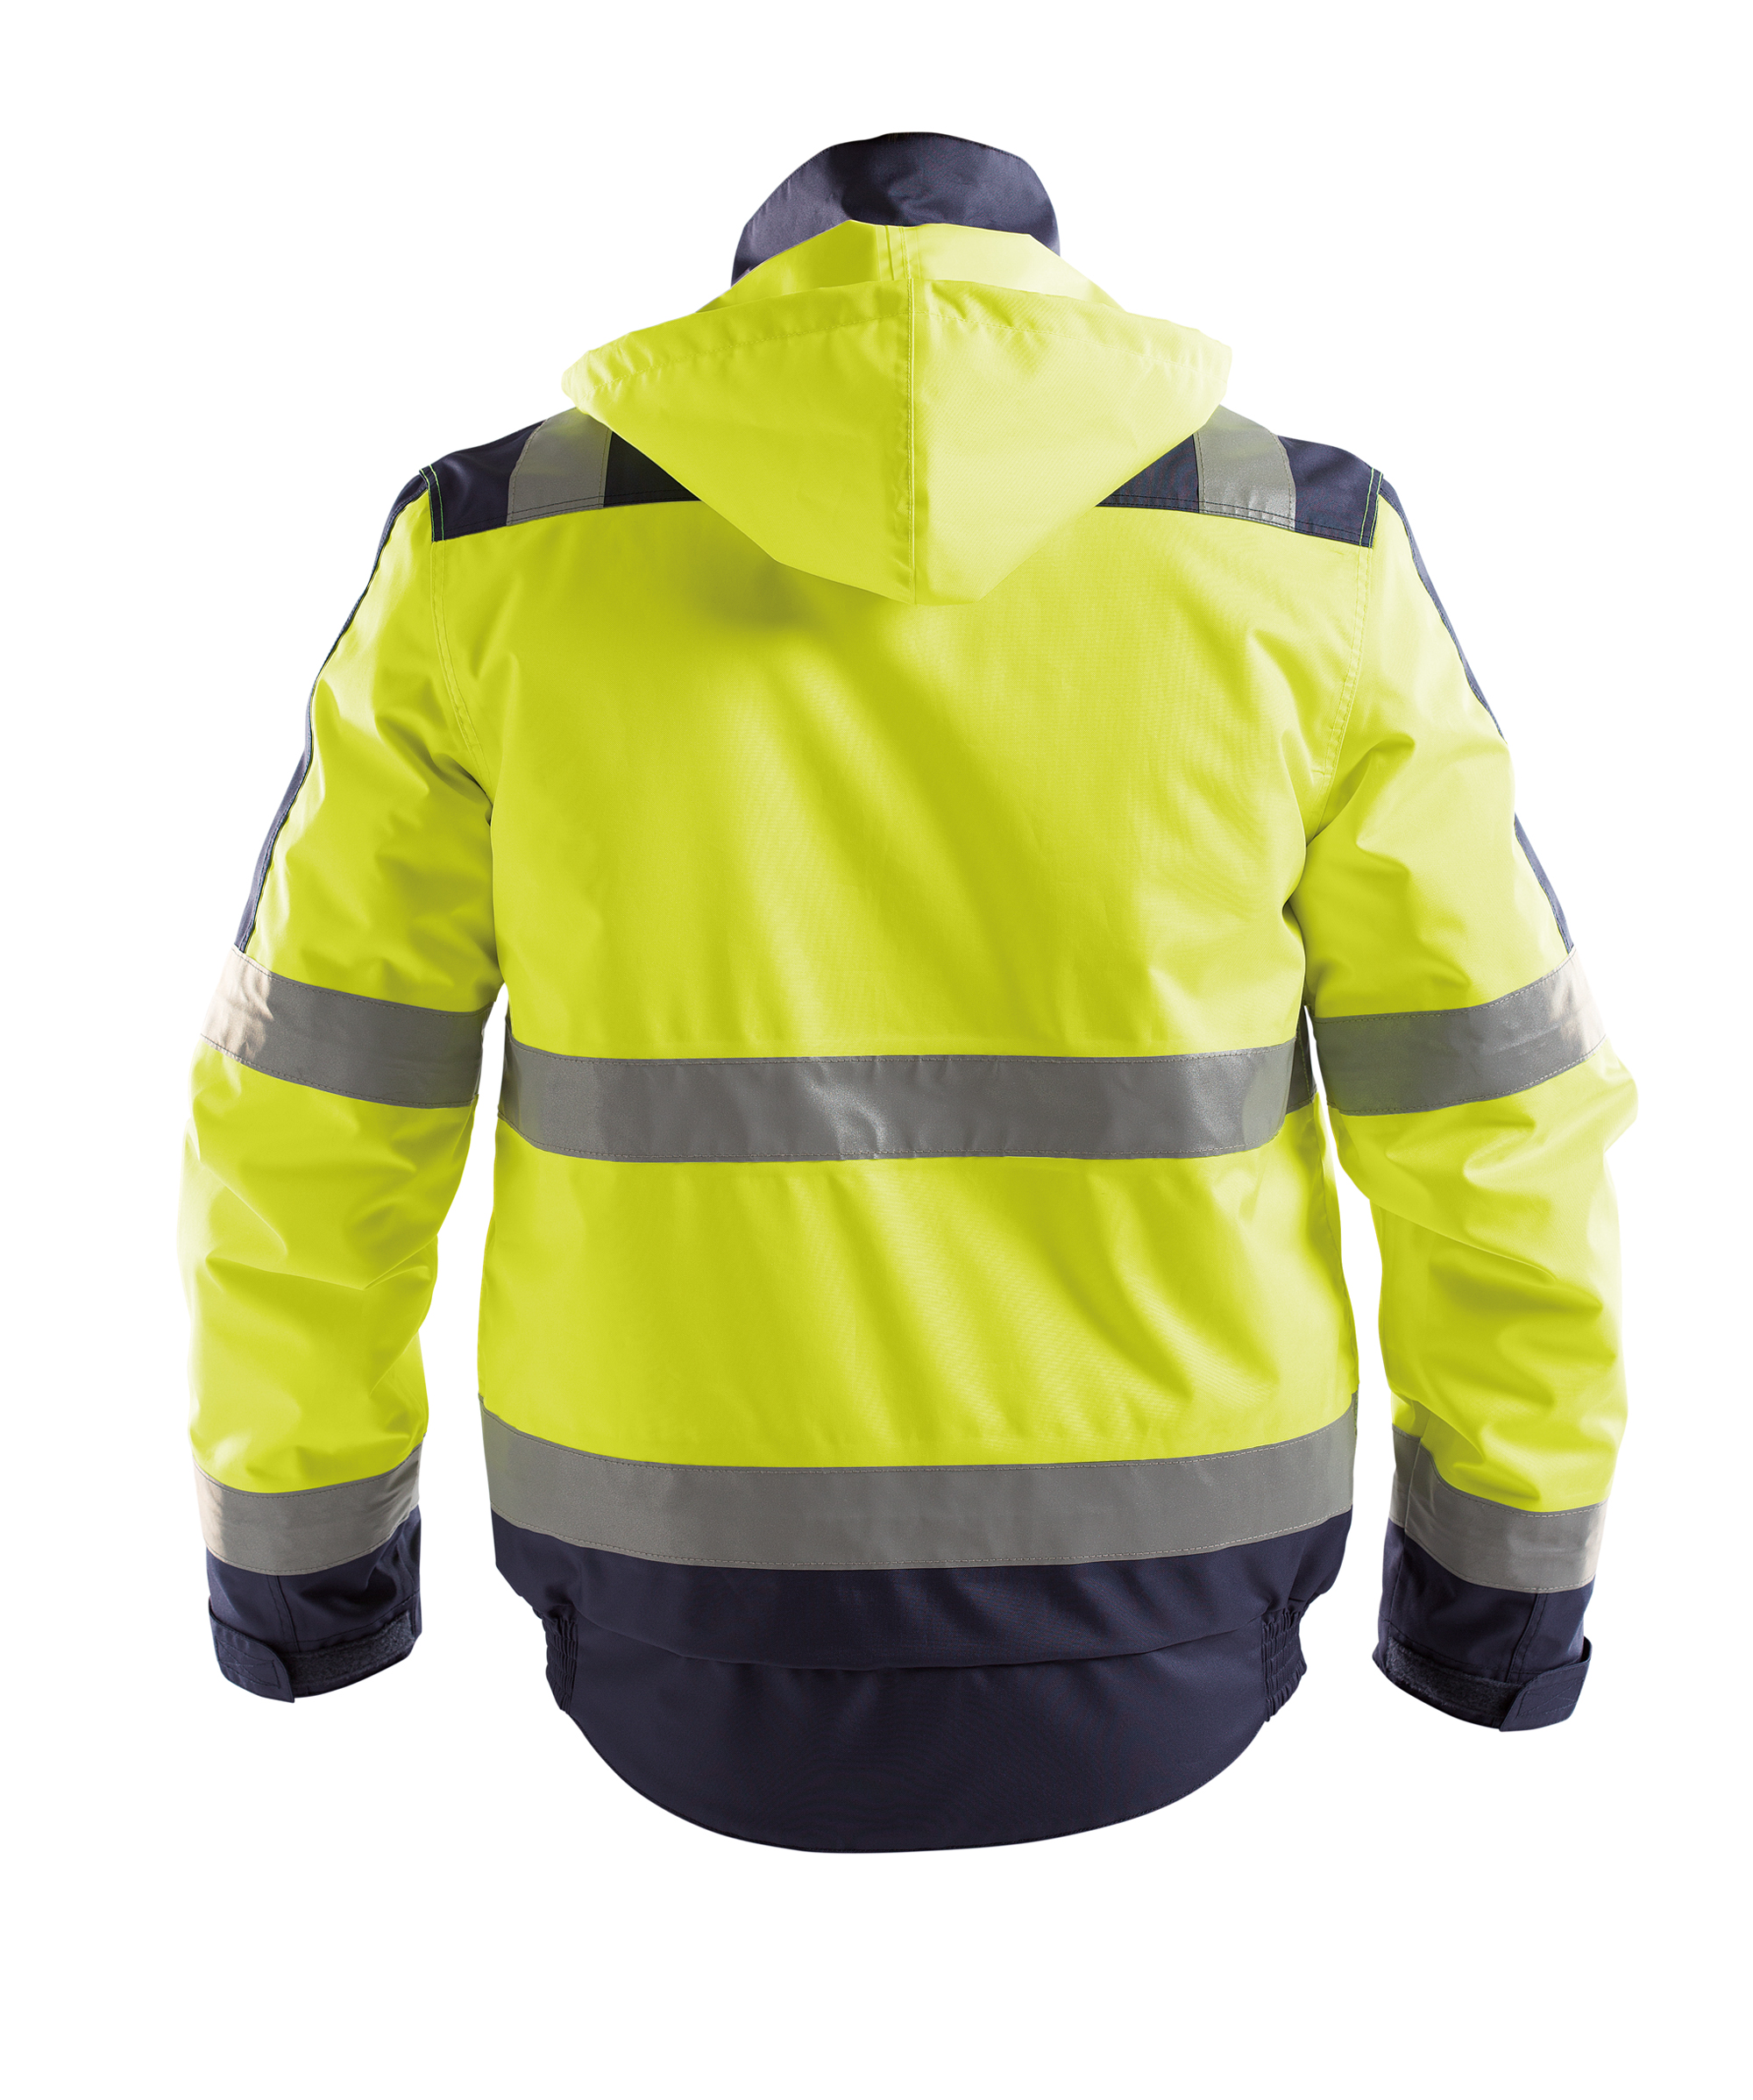 lima_high-visibility-winter-jacket_fluo-yellow-navy_back.jpg